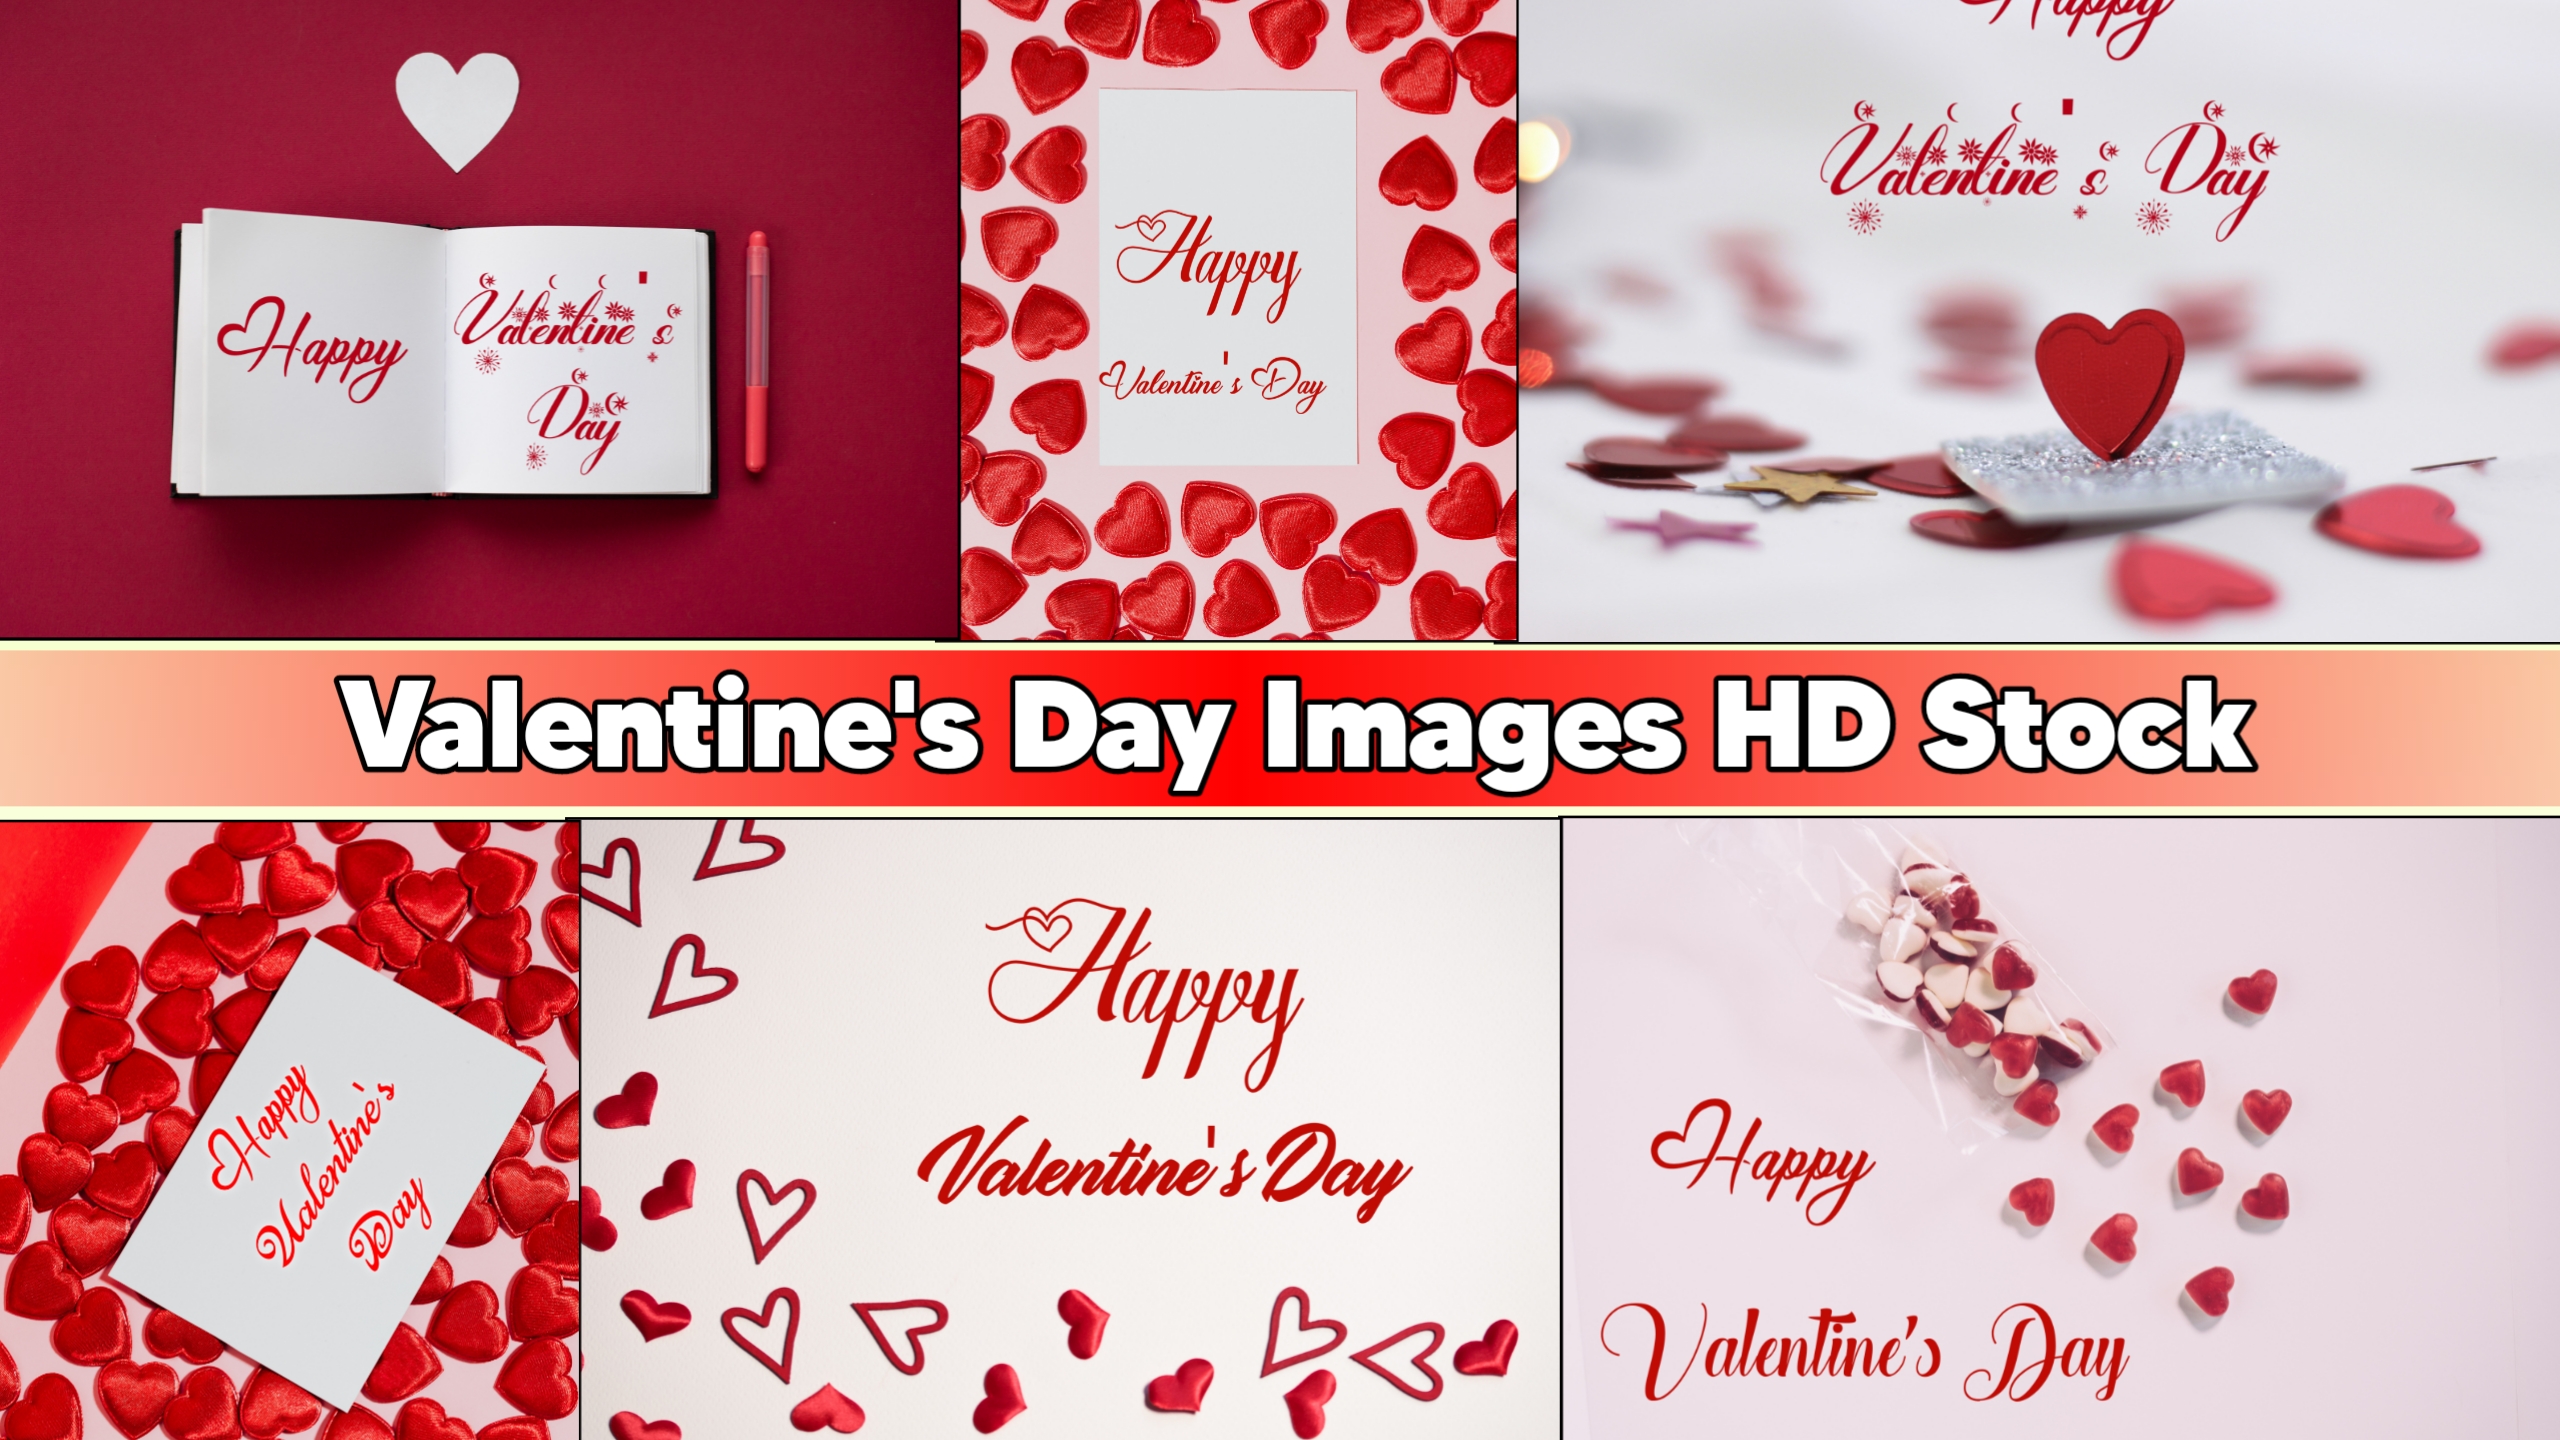 50+ Valentine's Day Image HD Download Stock